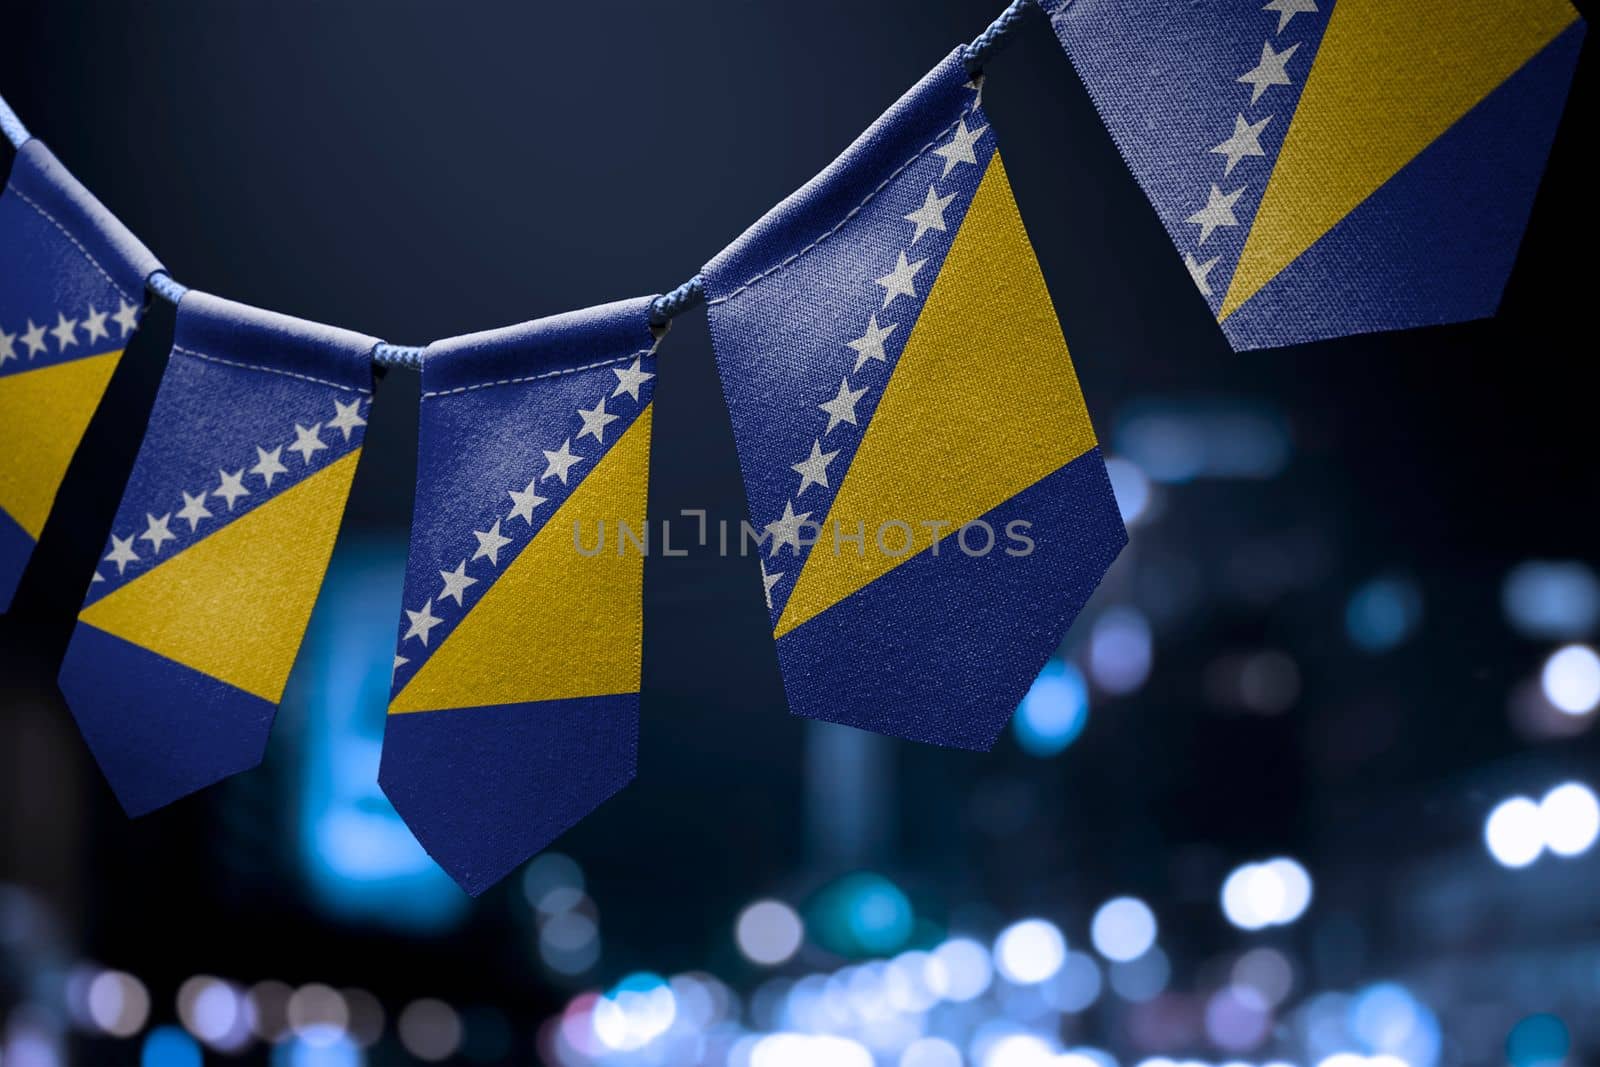 A garland of Bosnia and Herzegovina national flags on an abstract blurred background by butenkow